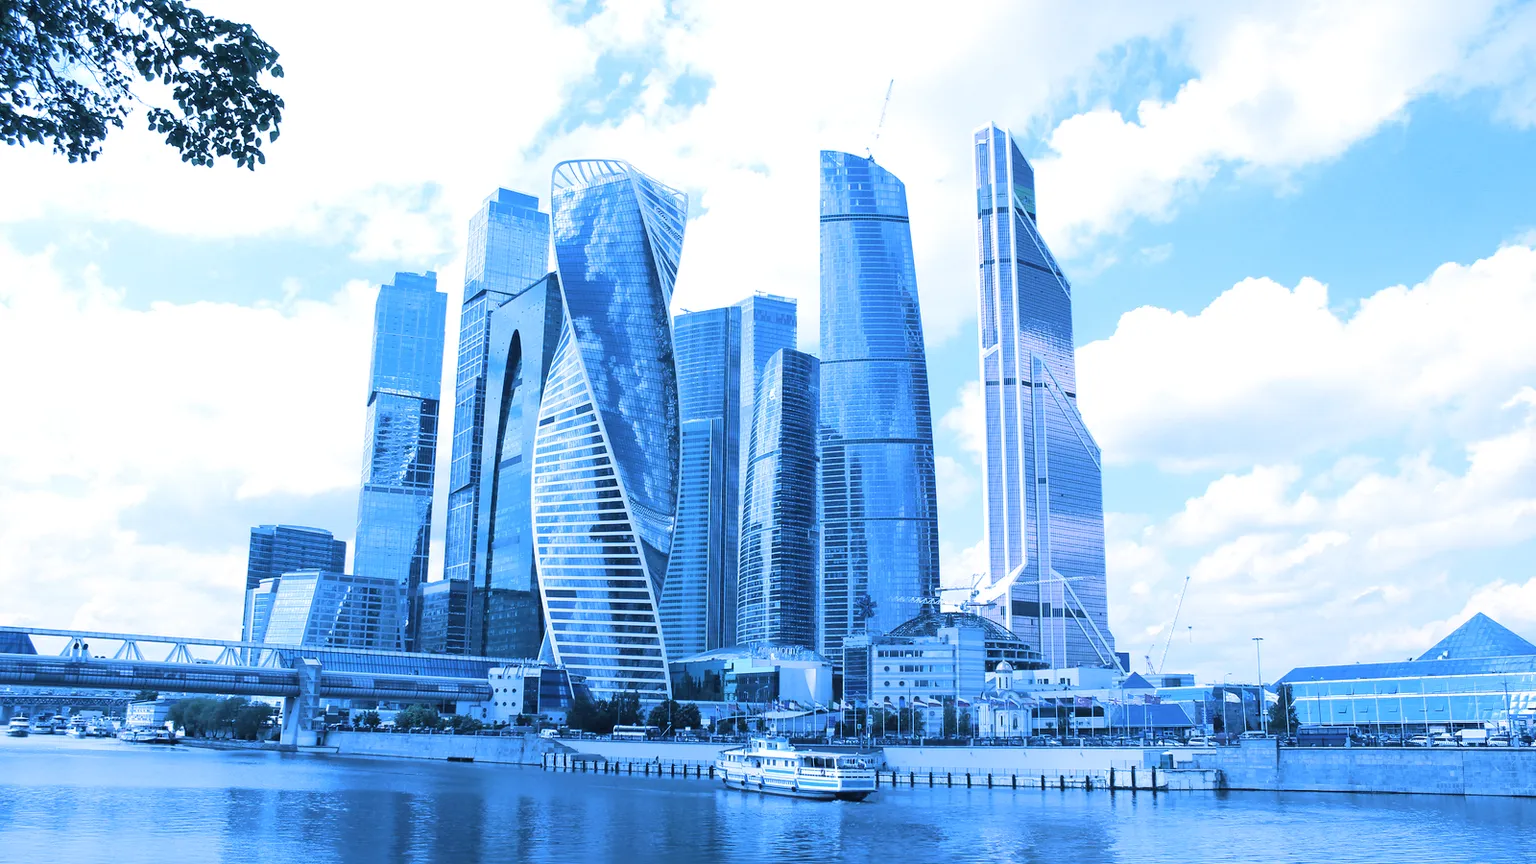 The Federation Tower is located in Moscow's business district. Image: Shutterstock